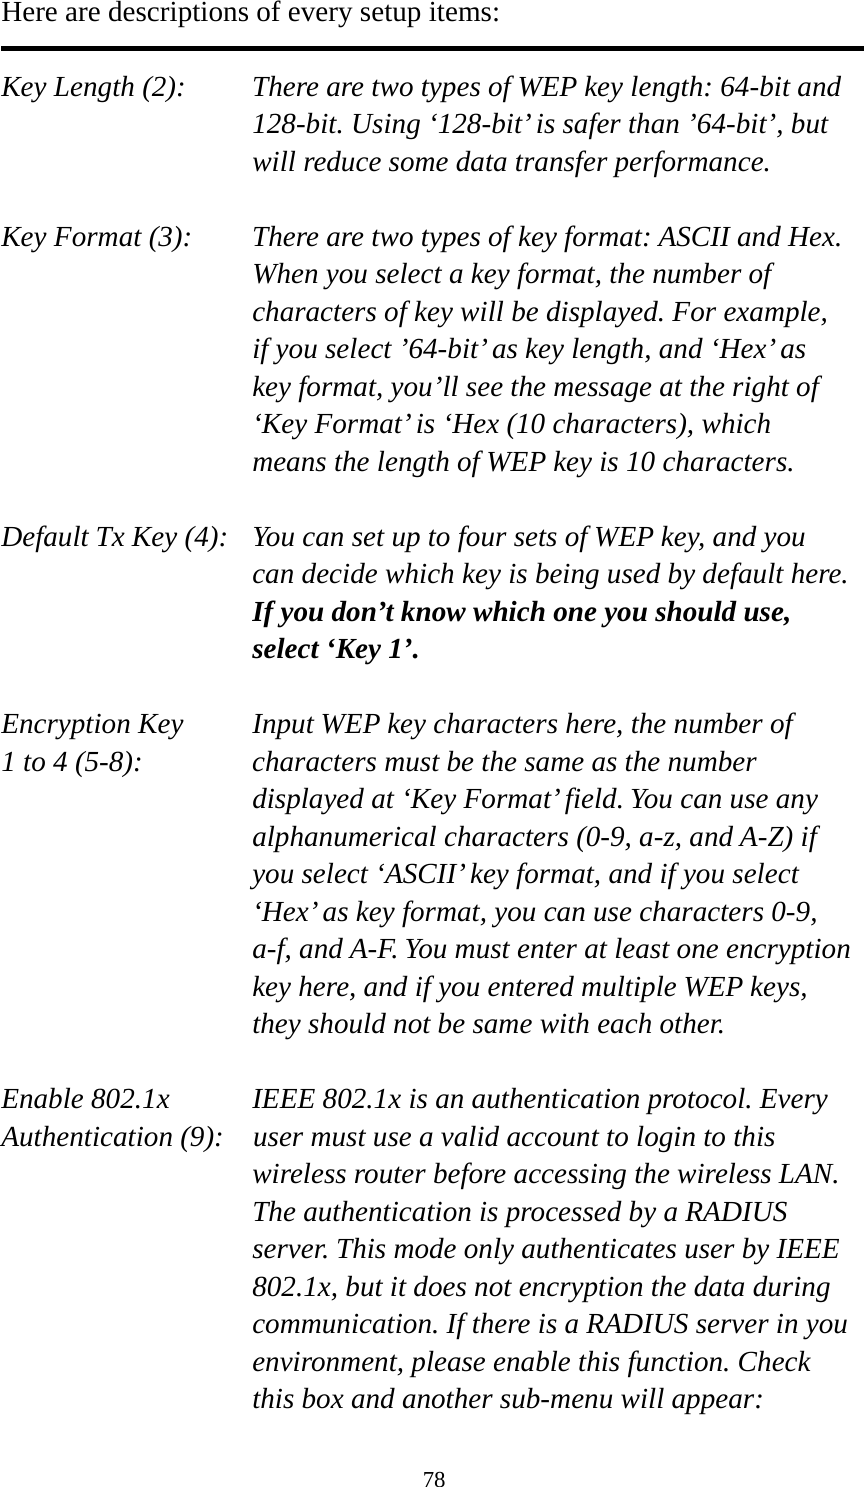 78 Here are descriptions of every setup items:  Key Length (2):    There are two types of WEP key length: 64-bit and 128-bit. Using ‘128-bit’ is safer than ’64-bit’, but will reduce some data transfer performance.  Key Format (3):    There are two types of key format: ASCII and Hex. When you select a key format, the number of characters of key will be displayed. For example, if you select ’64-bit’ as key length, and ‘Hex’ as key format, you’ll see the message at the right of ‘Key Format’ is ‘Hex (10 characters), which means the length of WEP key is 10 characters.  Default Tx Key (4):   You can set up to four sets of WEP key, and you can decide which key is being used by default here. If you don’t know which one you should use, select ‘Key 1’.  Encryption Key     Input WEP key characters here, the number of 1 to 4 (5-8):    characters must be the same as the number displayed at ‘Key Format’ field. You can use any alphanumerical characters (0-9, a-z, and A-Z) if you select ‘ASCII’ key format, and if you select ‘Hex’ as key format, you can use characters 0-9, a-f, and A-F. You must enter at least one encryption key here, and if you entered multiple WEP keys, they should not be same with each other.  Enable 802.1x  IEEE 802.1x is an authentication protocol. Every   Authentication (9):    user must use a valid account to login to this wireless router before accessing the wireless LAN. The authentication is processed by a RADIUS server. This mode only authenticates user by IEEE 802.1x, but it does not encryption the data during communication. If there is a RADIUS server in you environment, please enable this function. Check this box and another sub-menu will appear: 